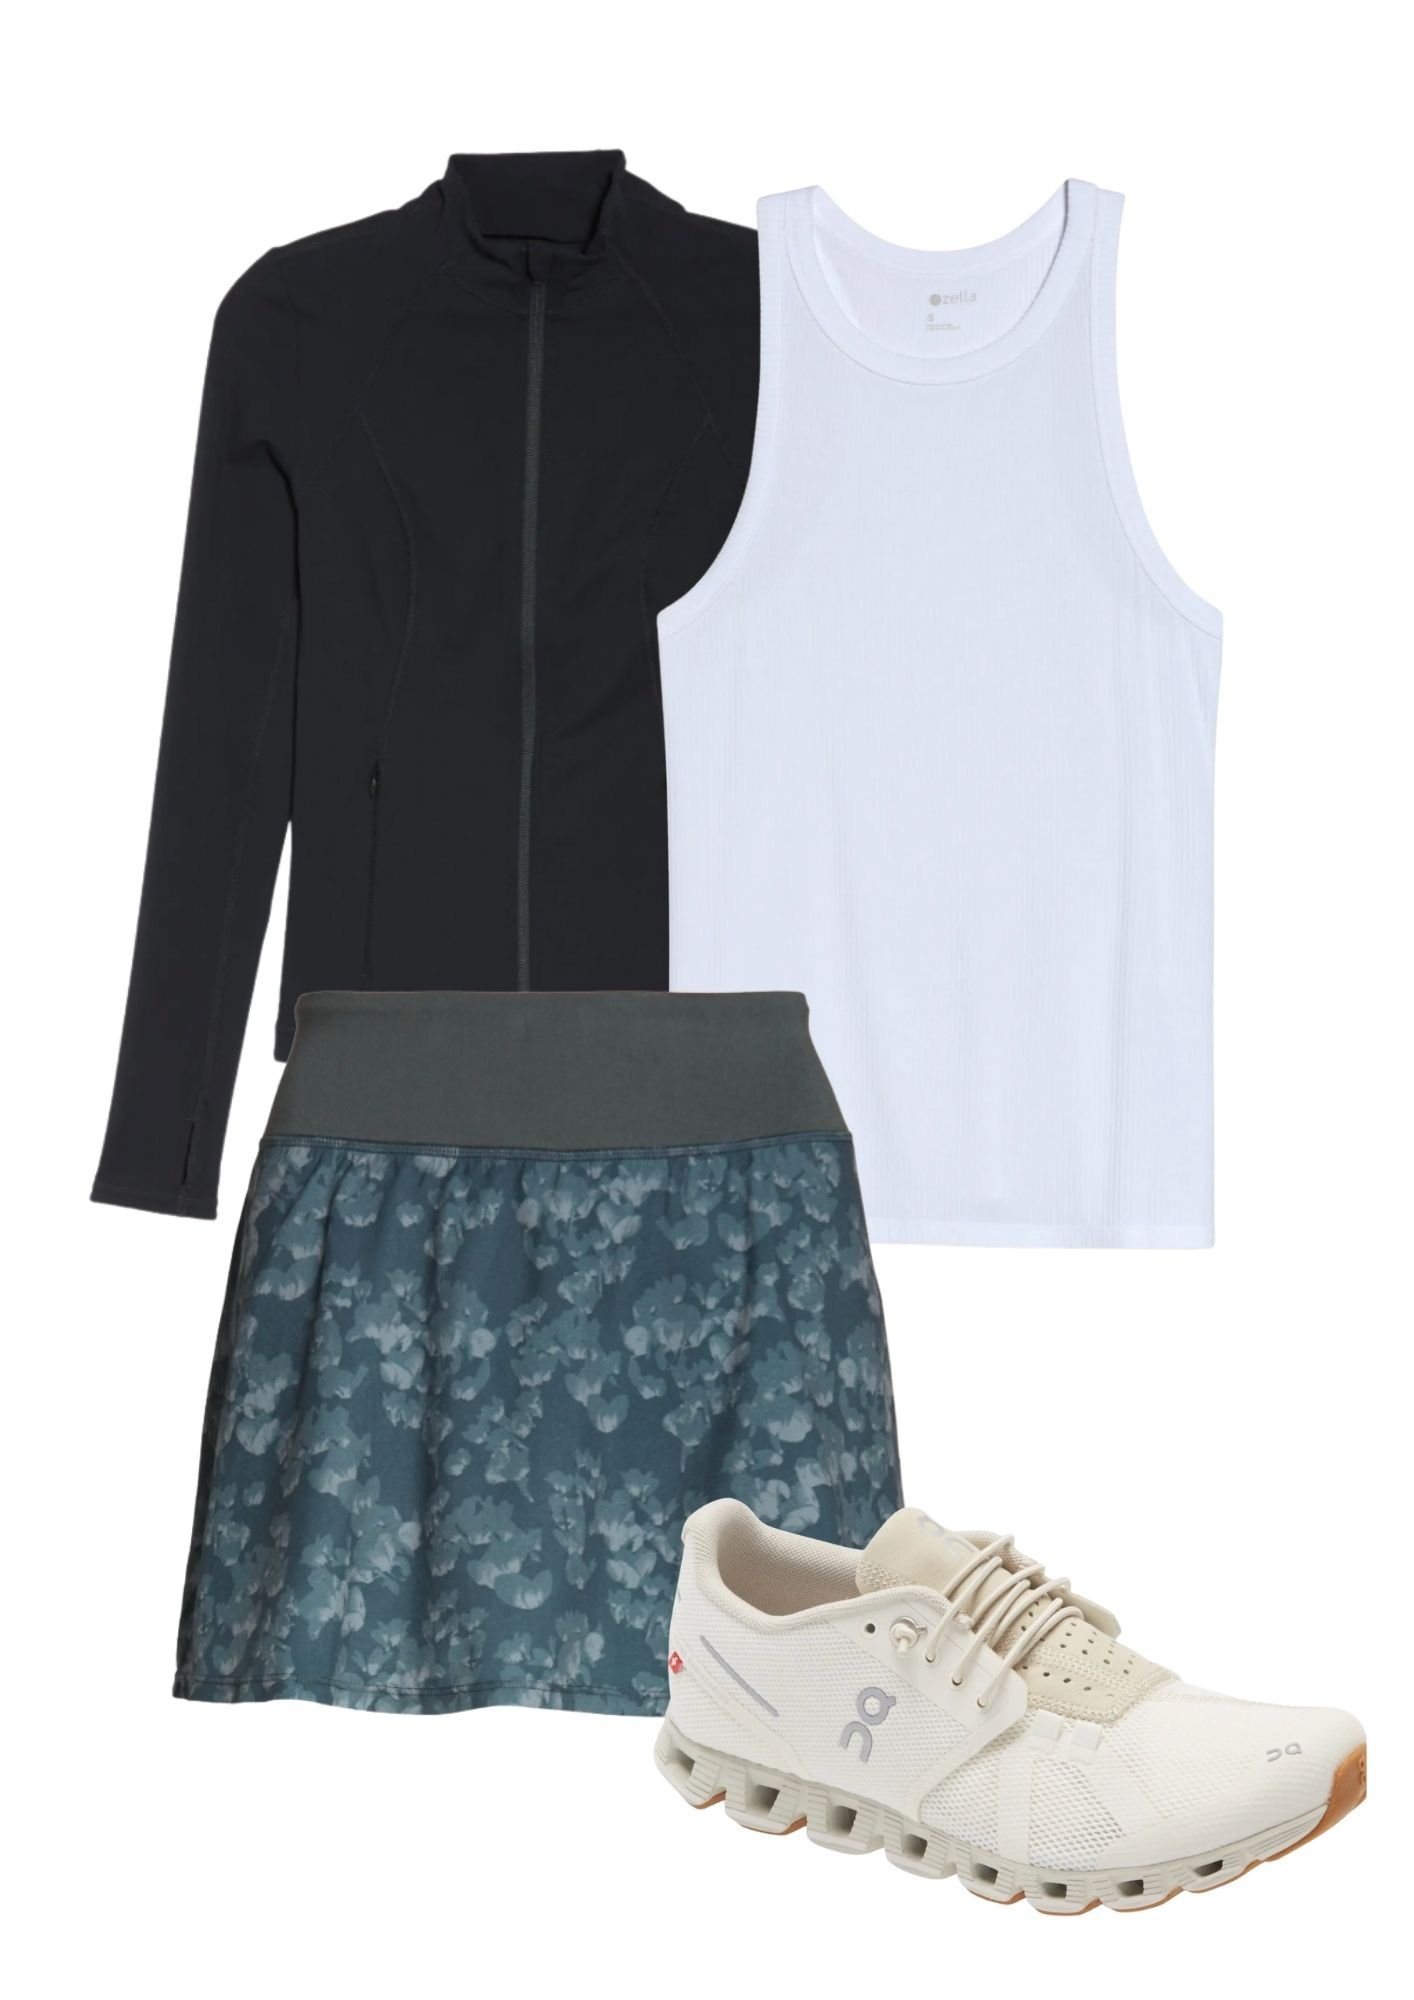 Cute Athleisure Outfit Ideas with skort